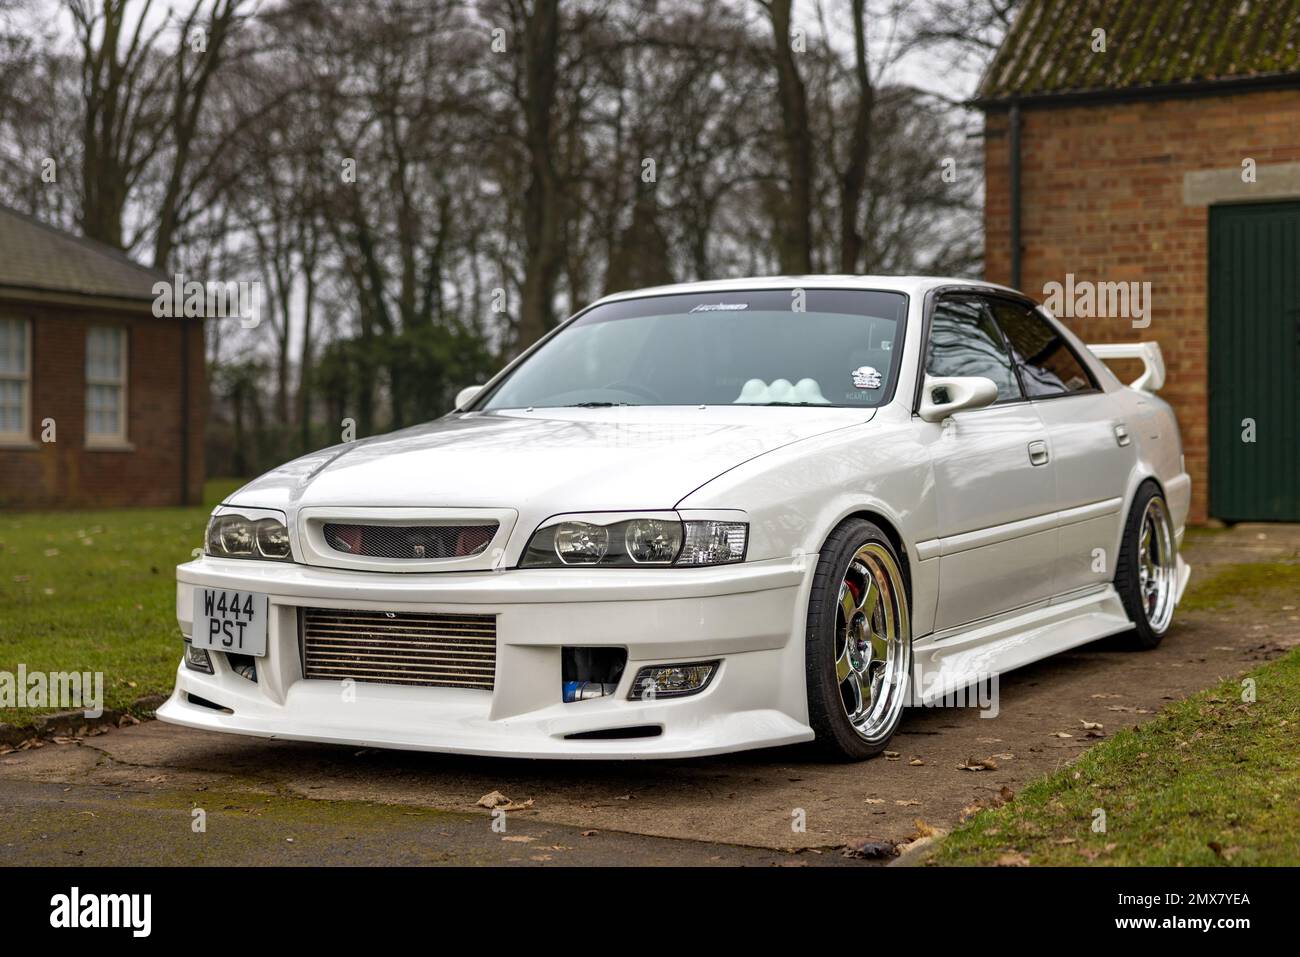 2001 Toyota Chaser. on display at the Japanese Assembly held at Bicester Heritage Centre on the 29th January 2023. Stock Photo